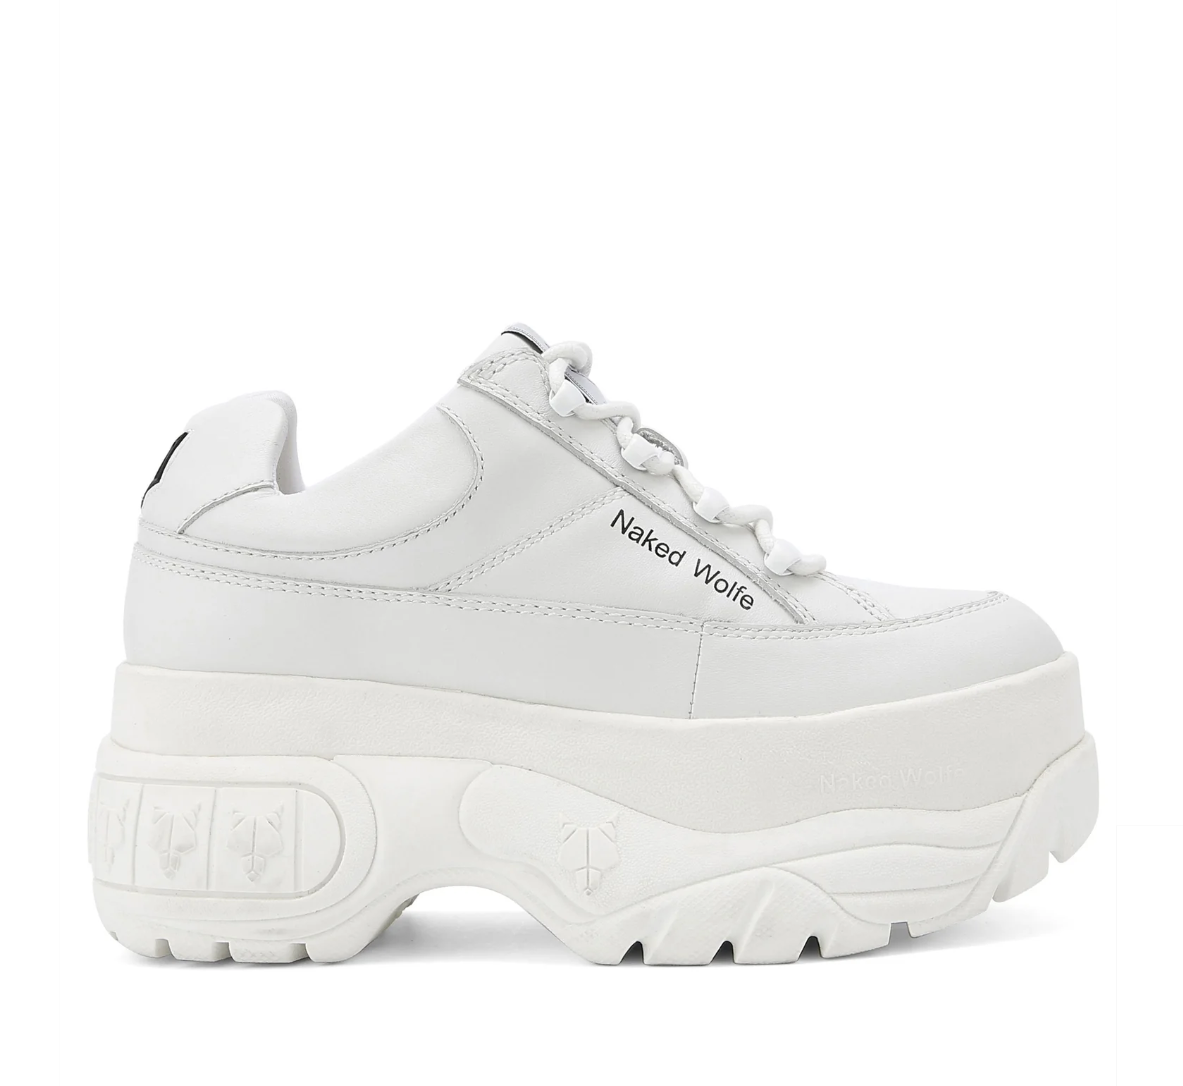 Naked Wolfe + Sporty White Leather Sneakers